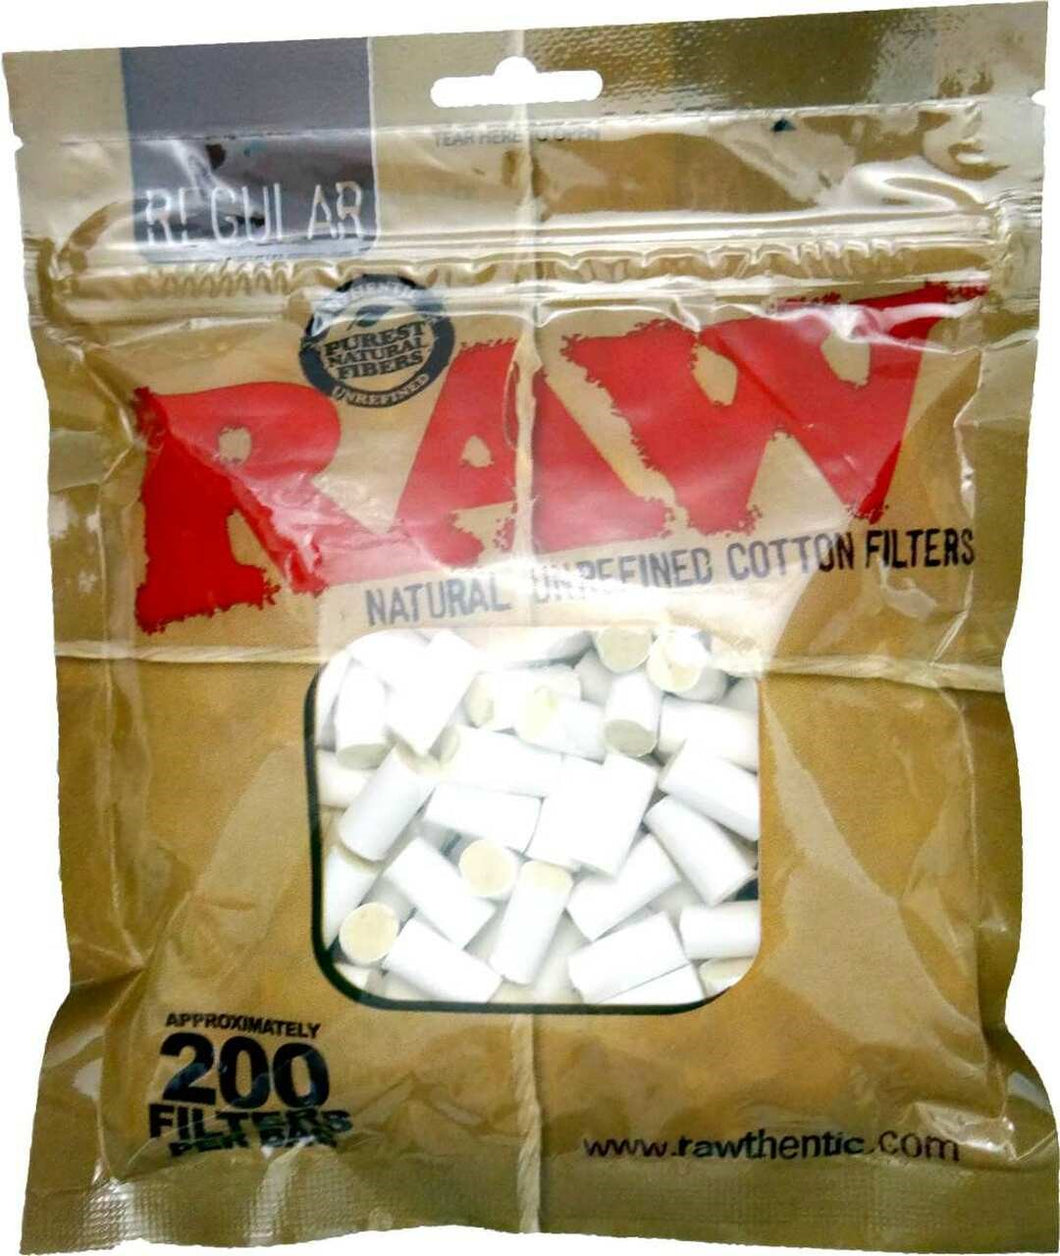 Raw 100% Cotton Filter Tips Bag of 200 19+